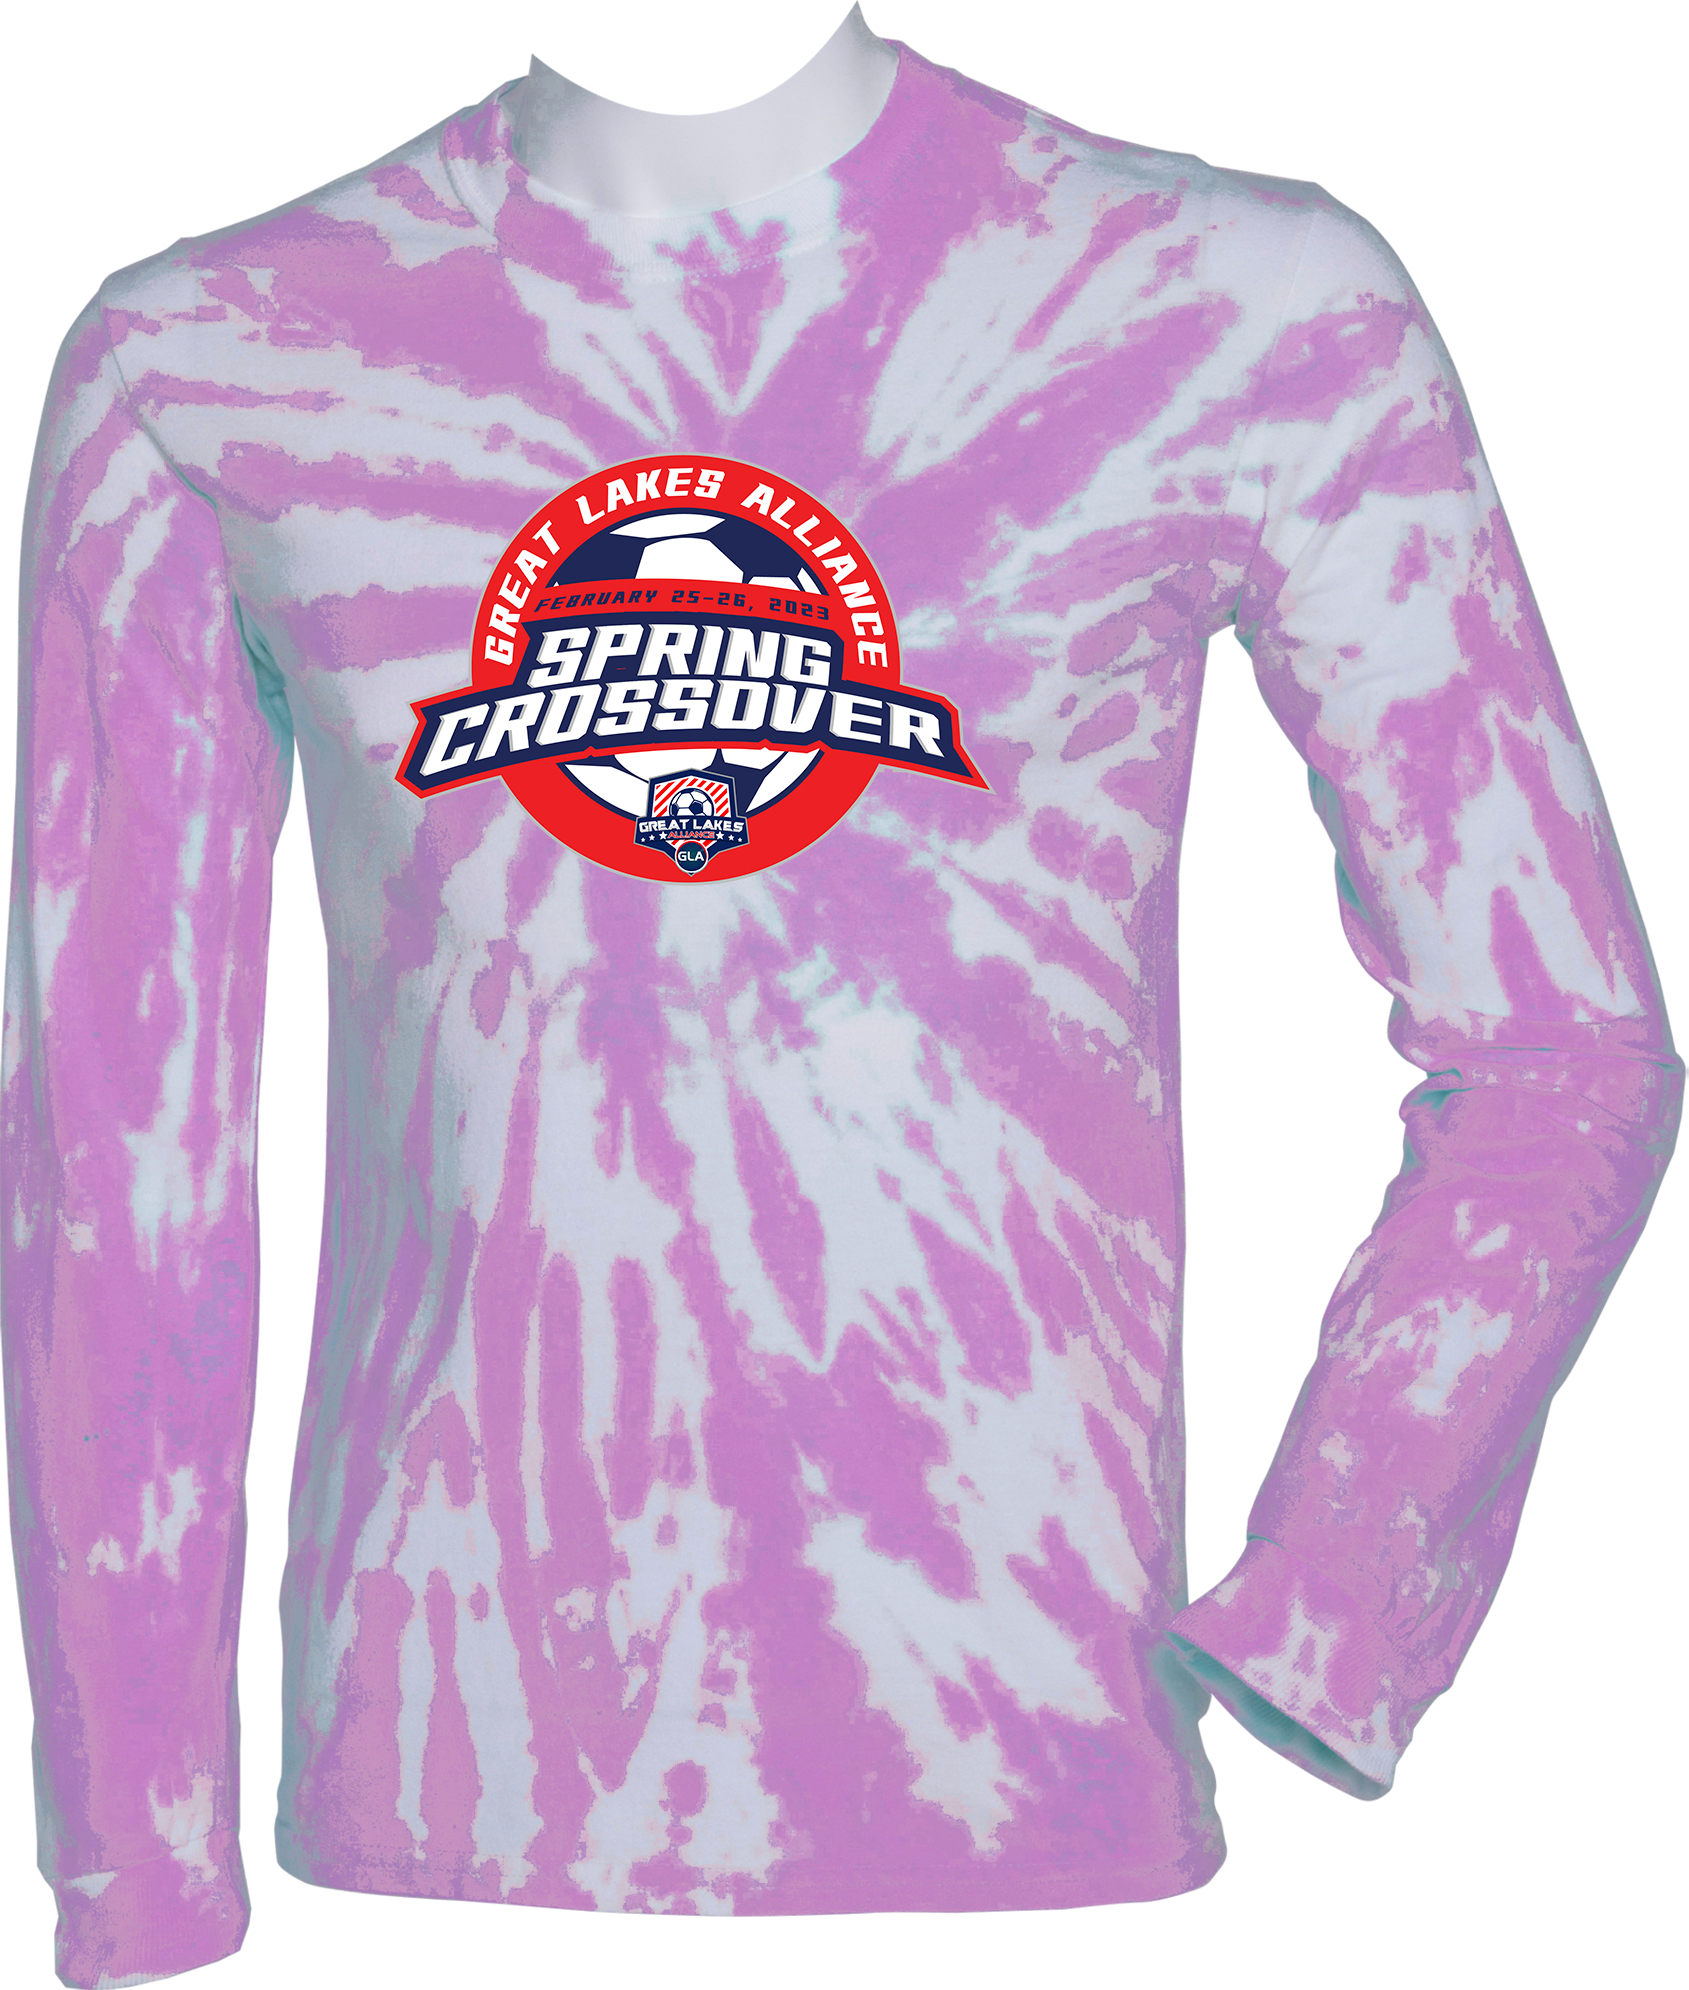 TIE-DYE LONG SLEEVES - 2023 Great Lakes Alliance Spring Crossover